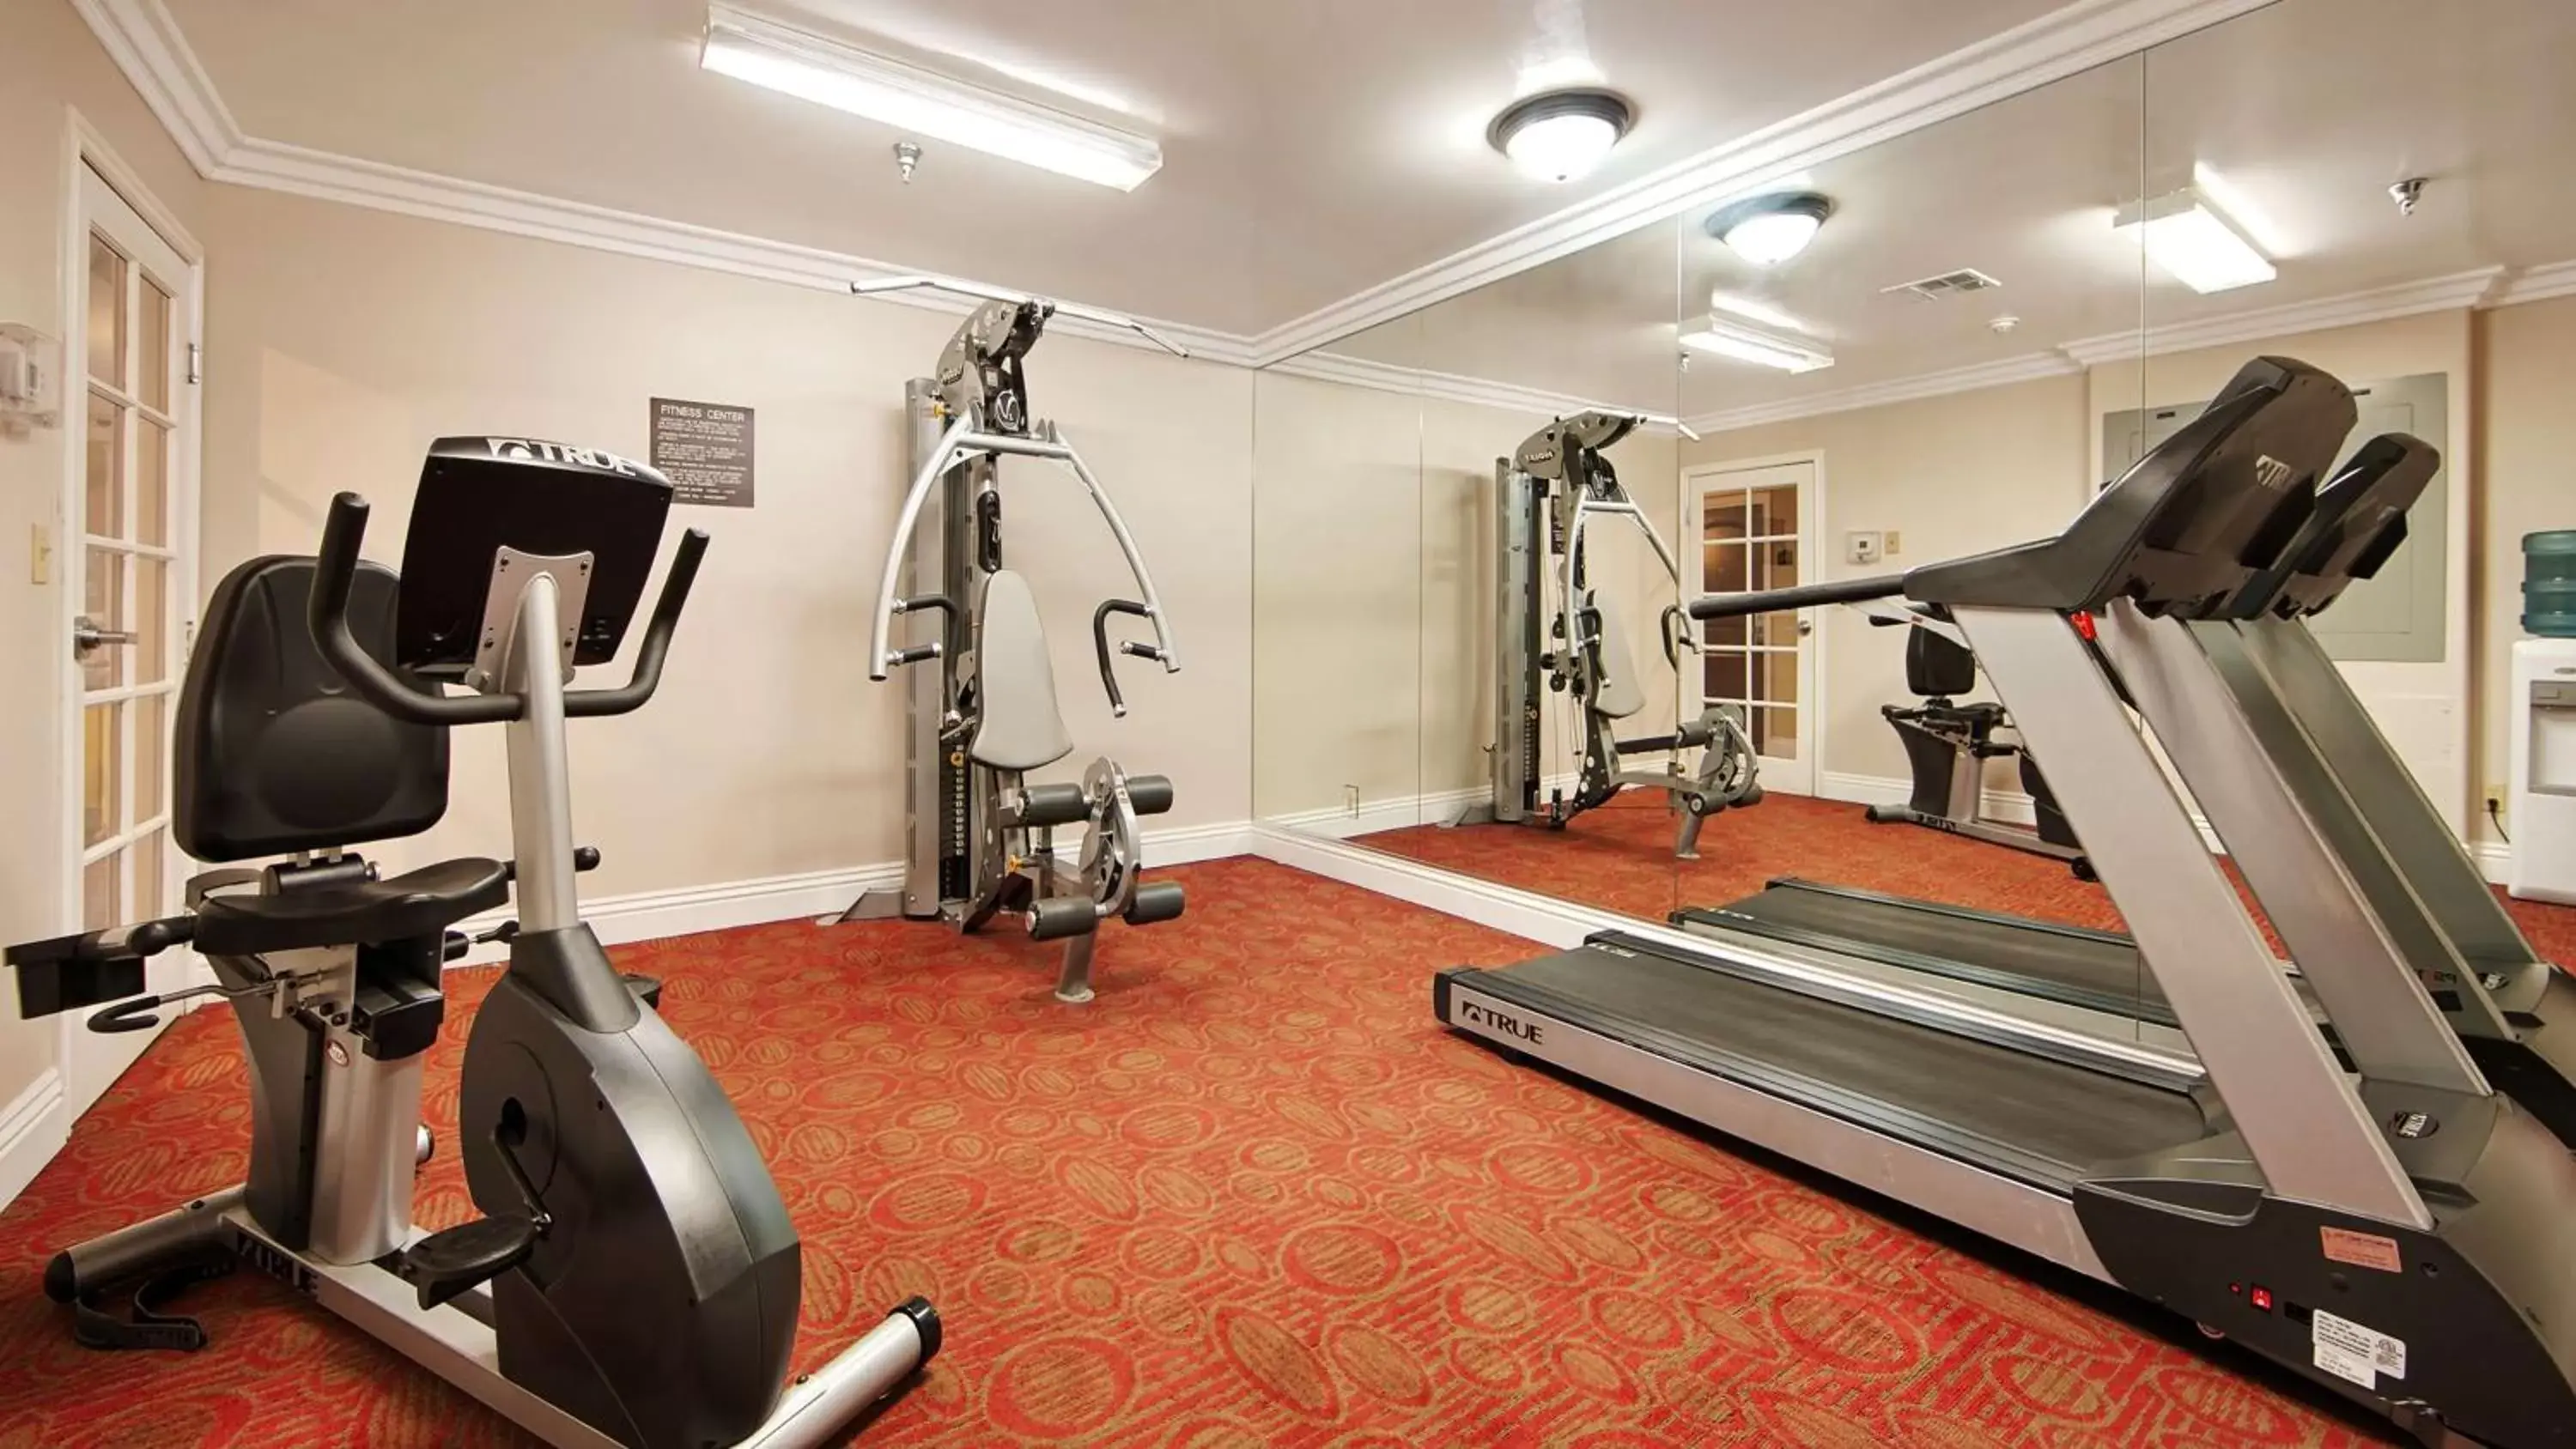 Fitness centre/facilities, Fitness Center/Facilities in Best Western Burbank Airport Inn